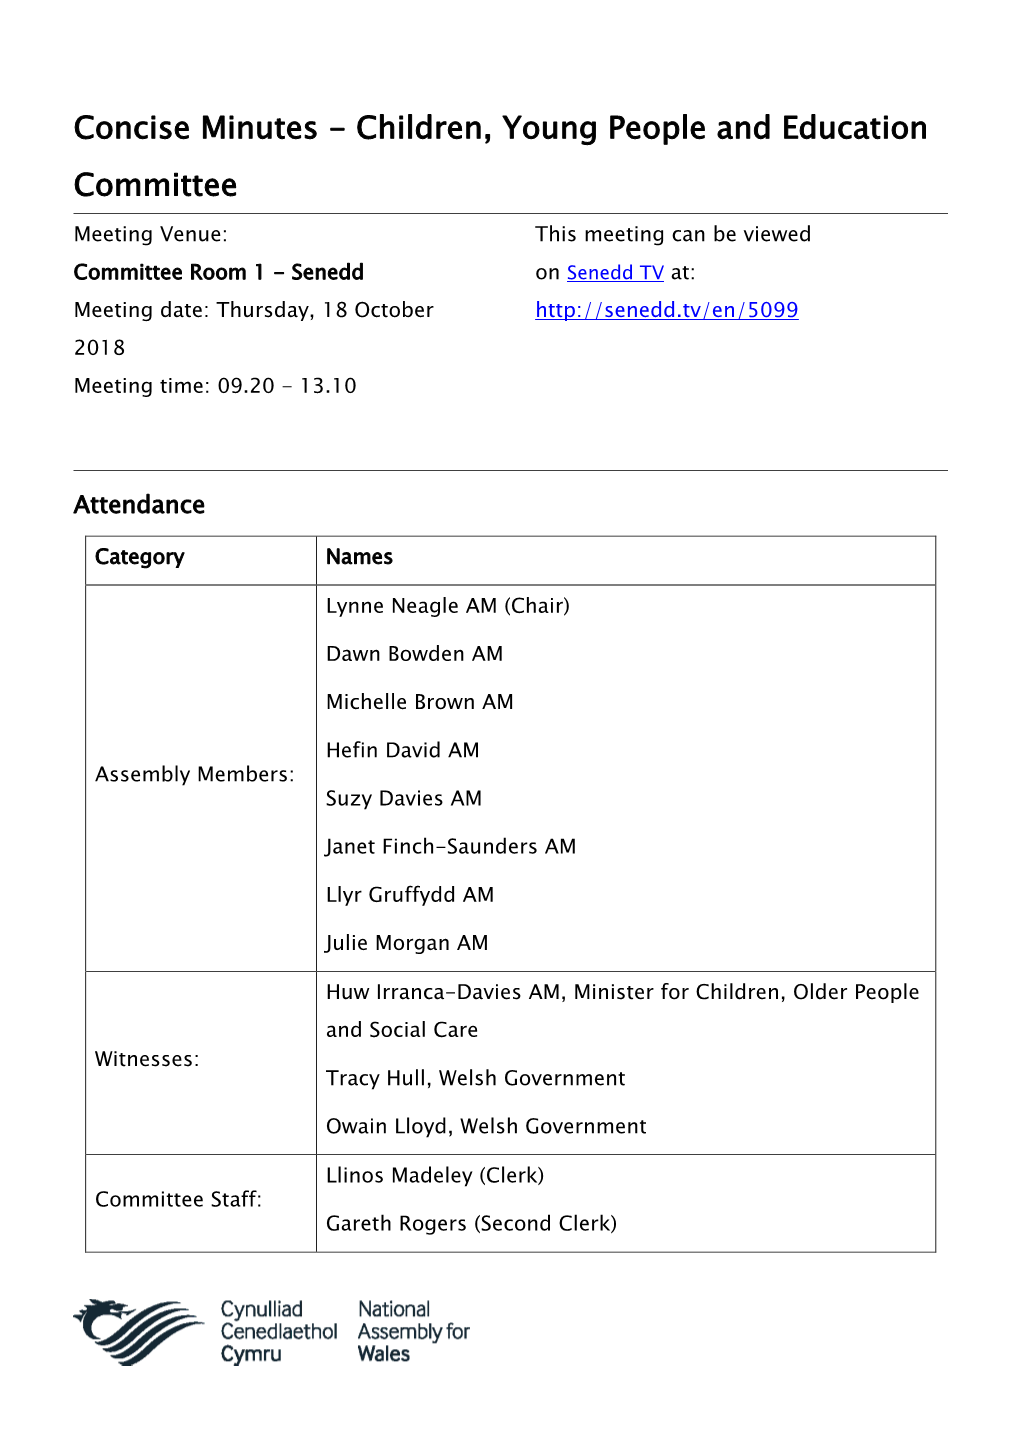 Concise Minutes - Children, Young People and Education Committee